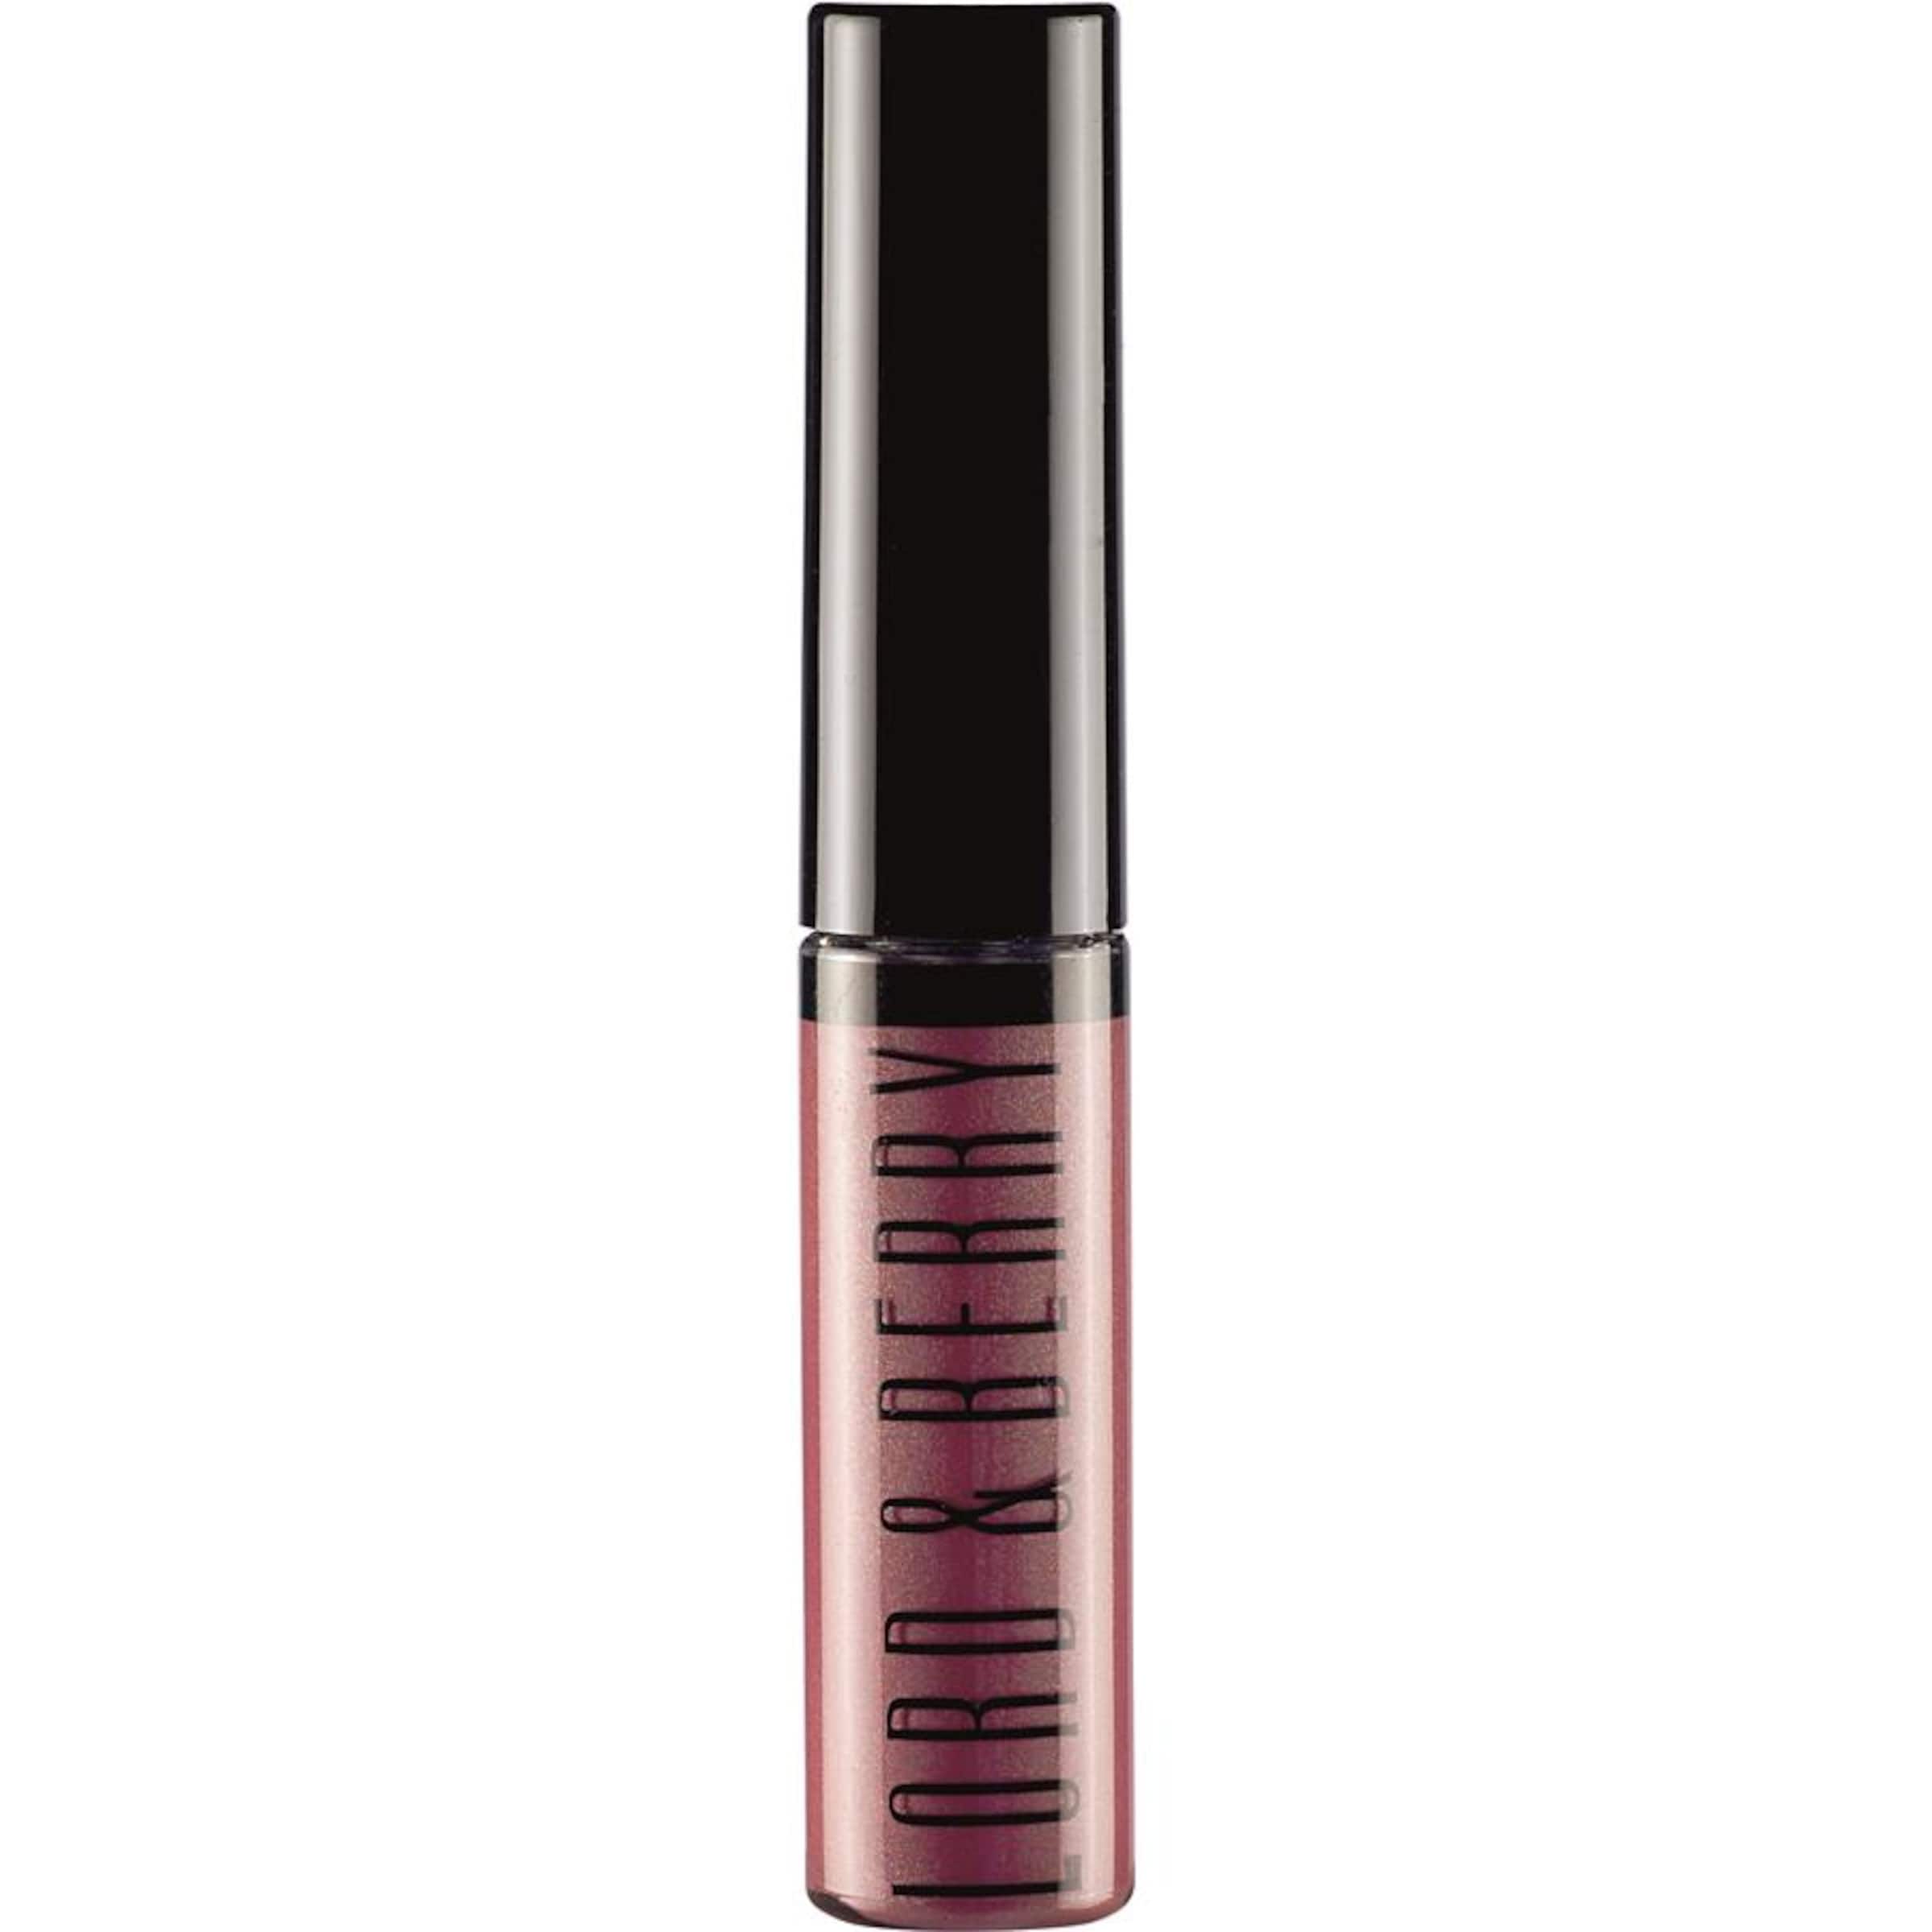 Lord & Berry Lipgloss Skin in Pink 